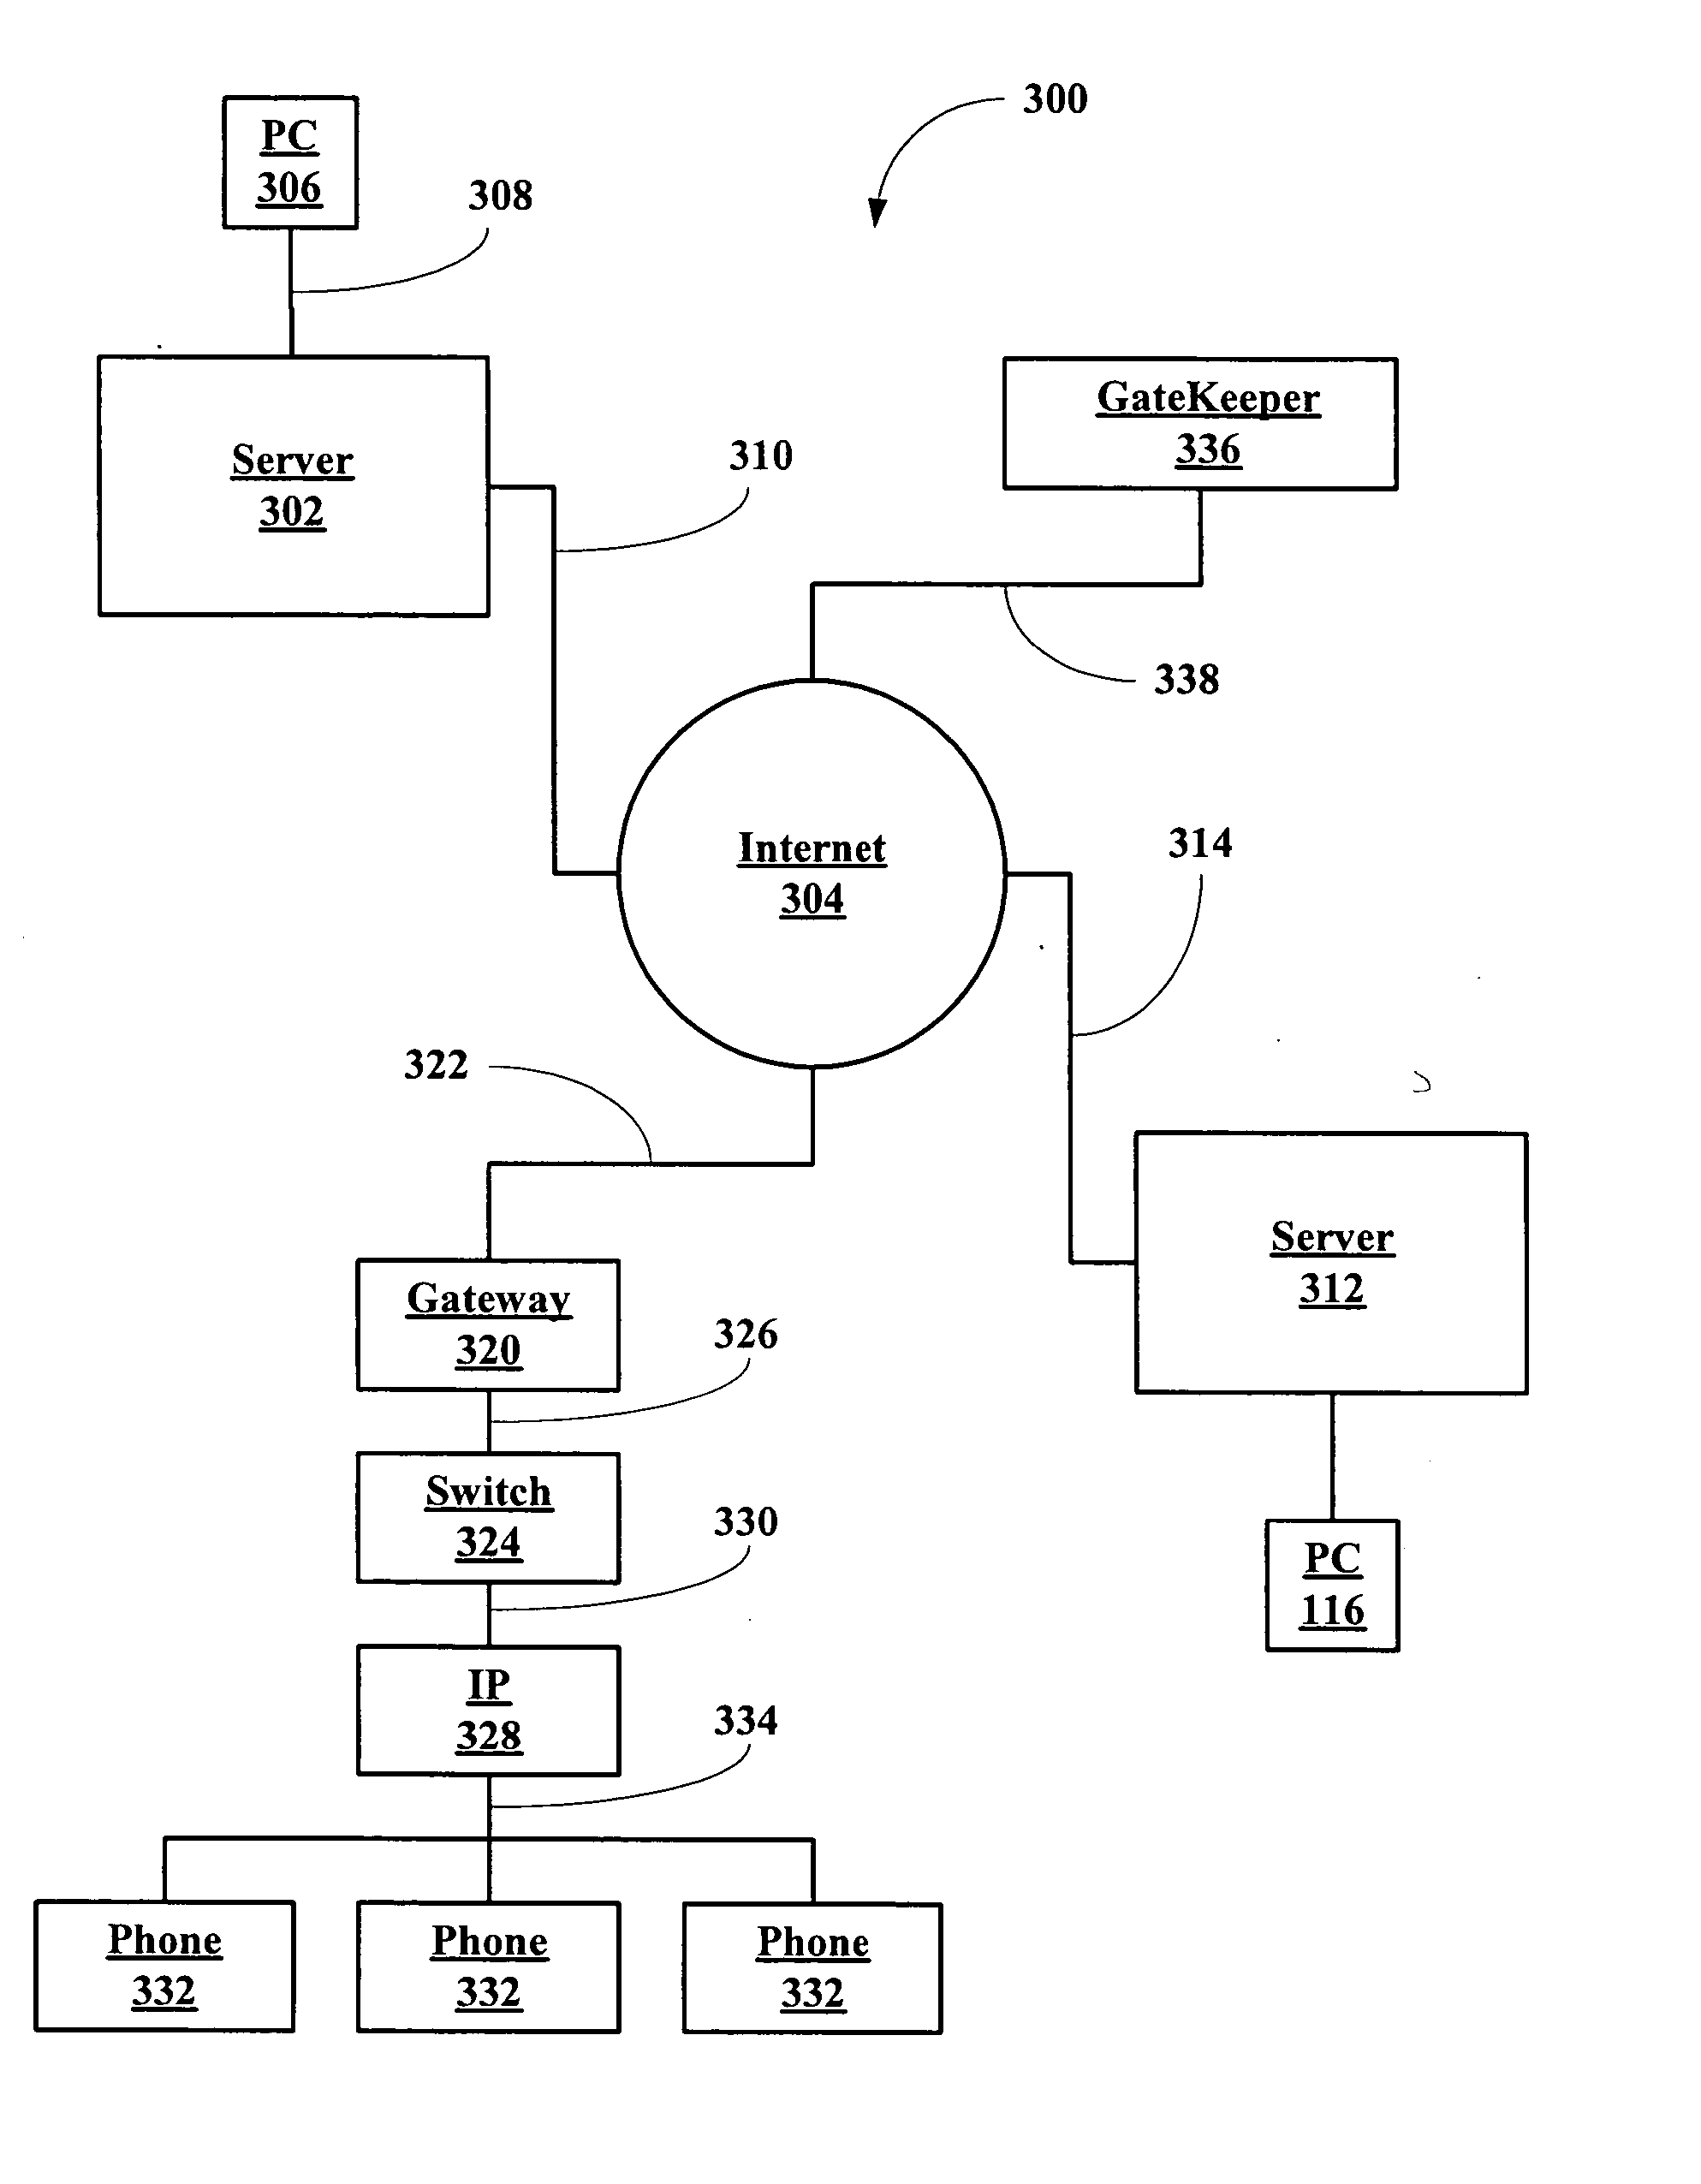 System for transmitting emergency and notification messages over a phone line